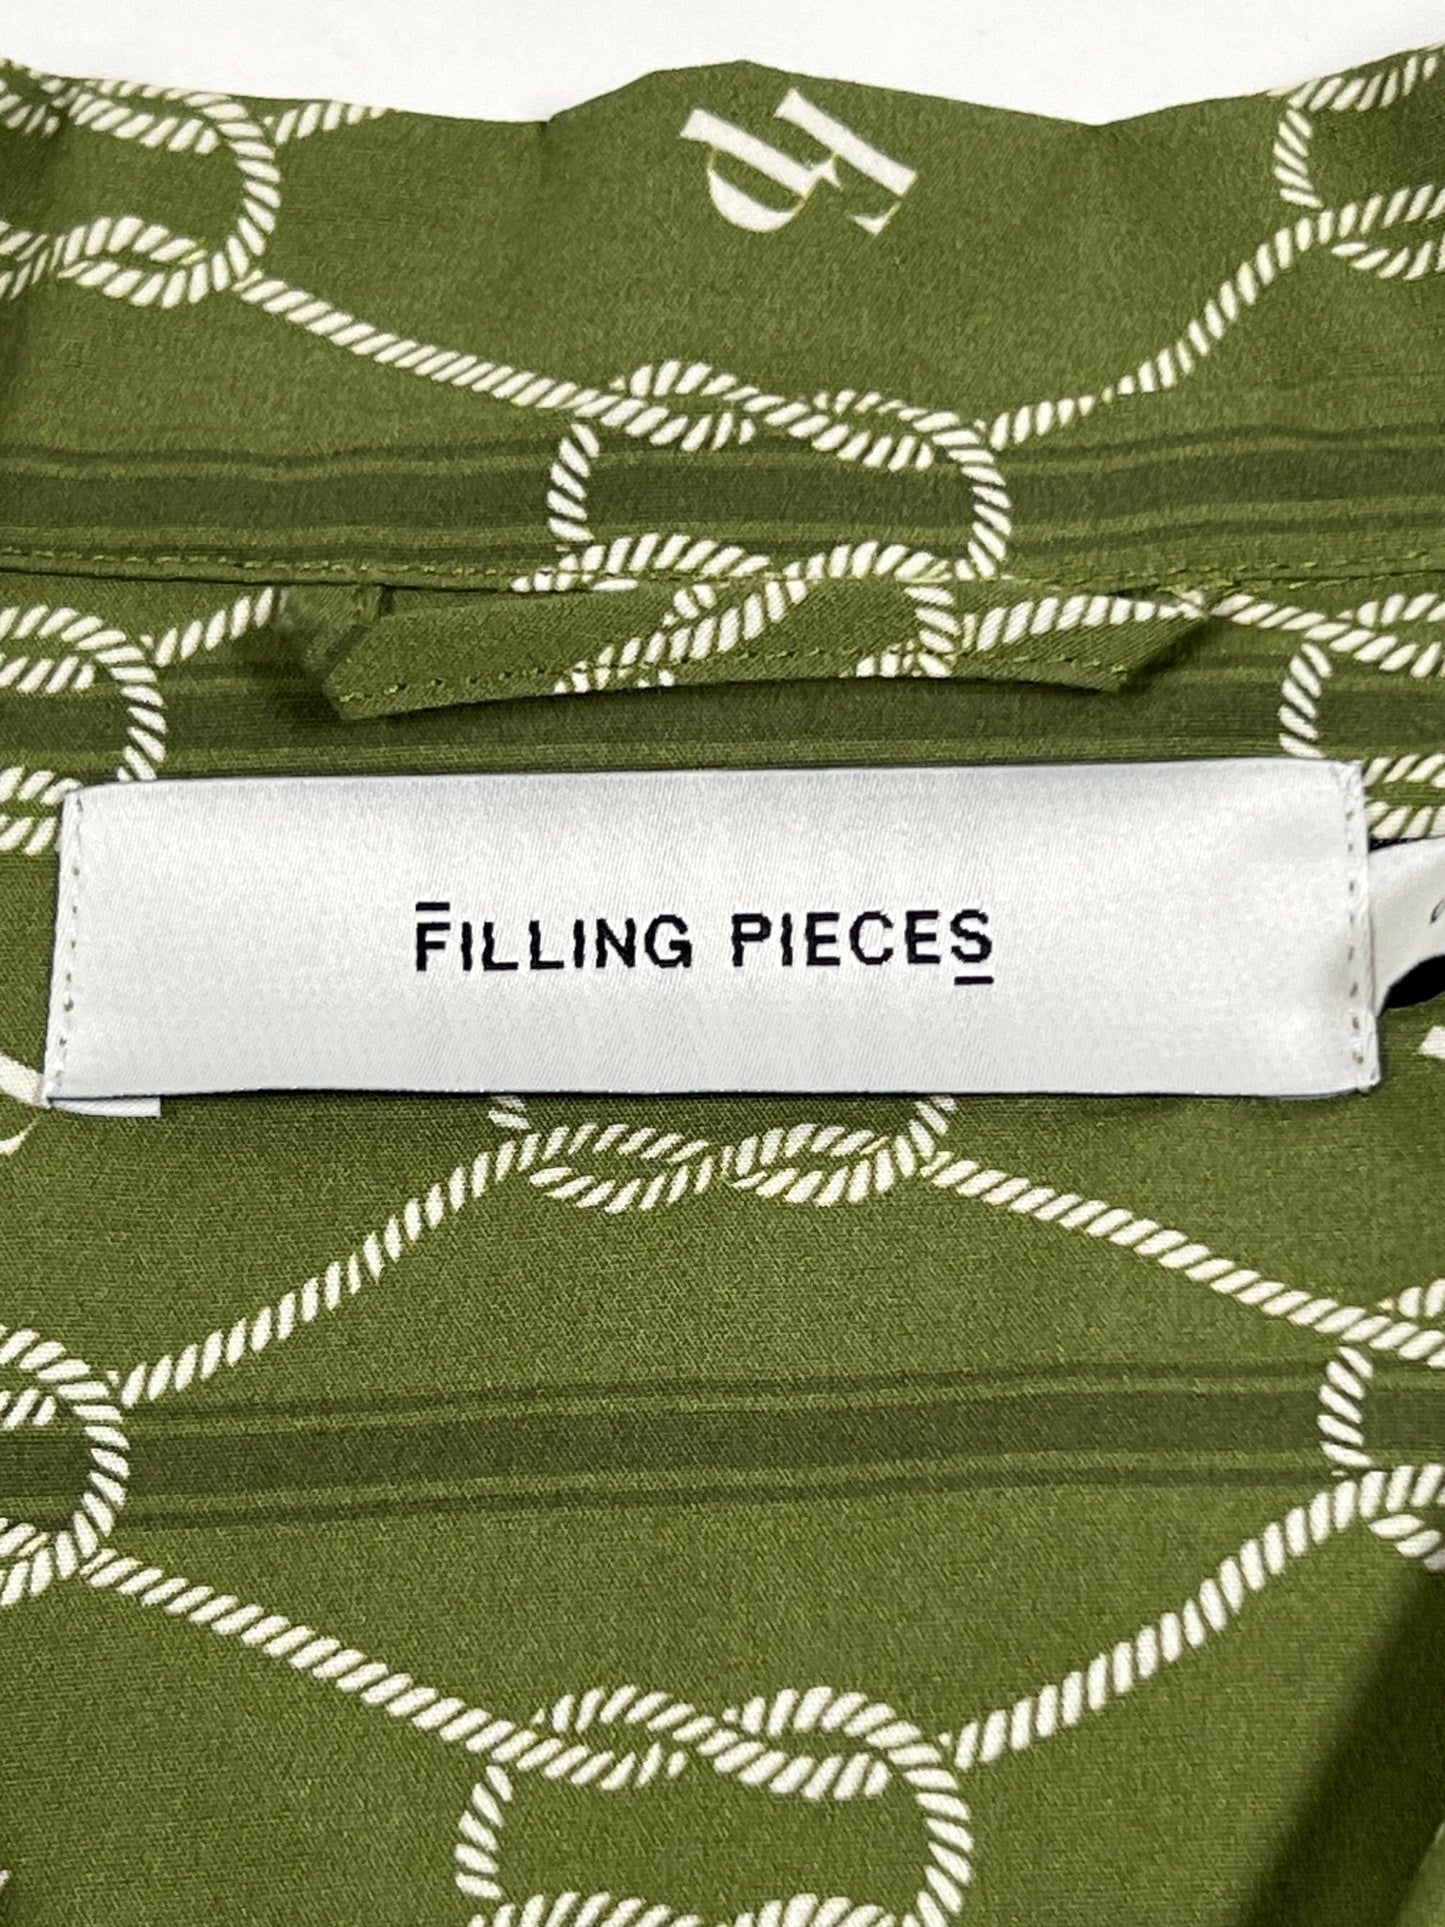 A close-up view of a clothing label with the text "FILLING PIECES" on an olive green patterned fabric of a FILLING PIECES RESORT MONOGRAM SHIRT OLIVE.